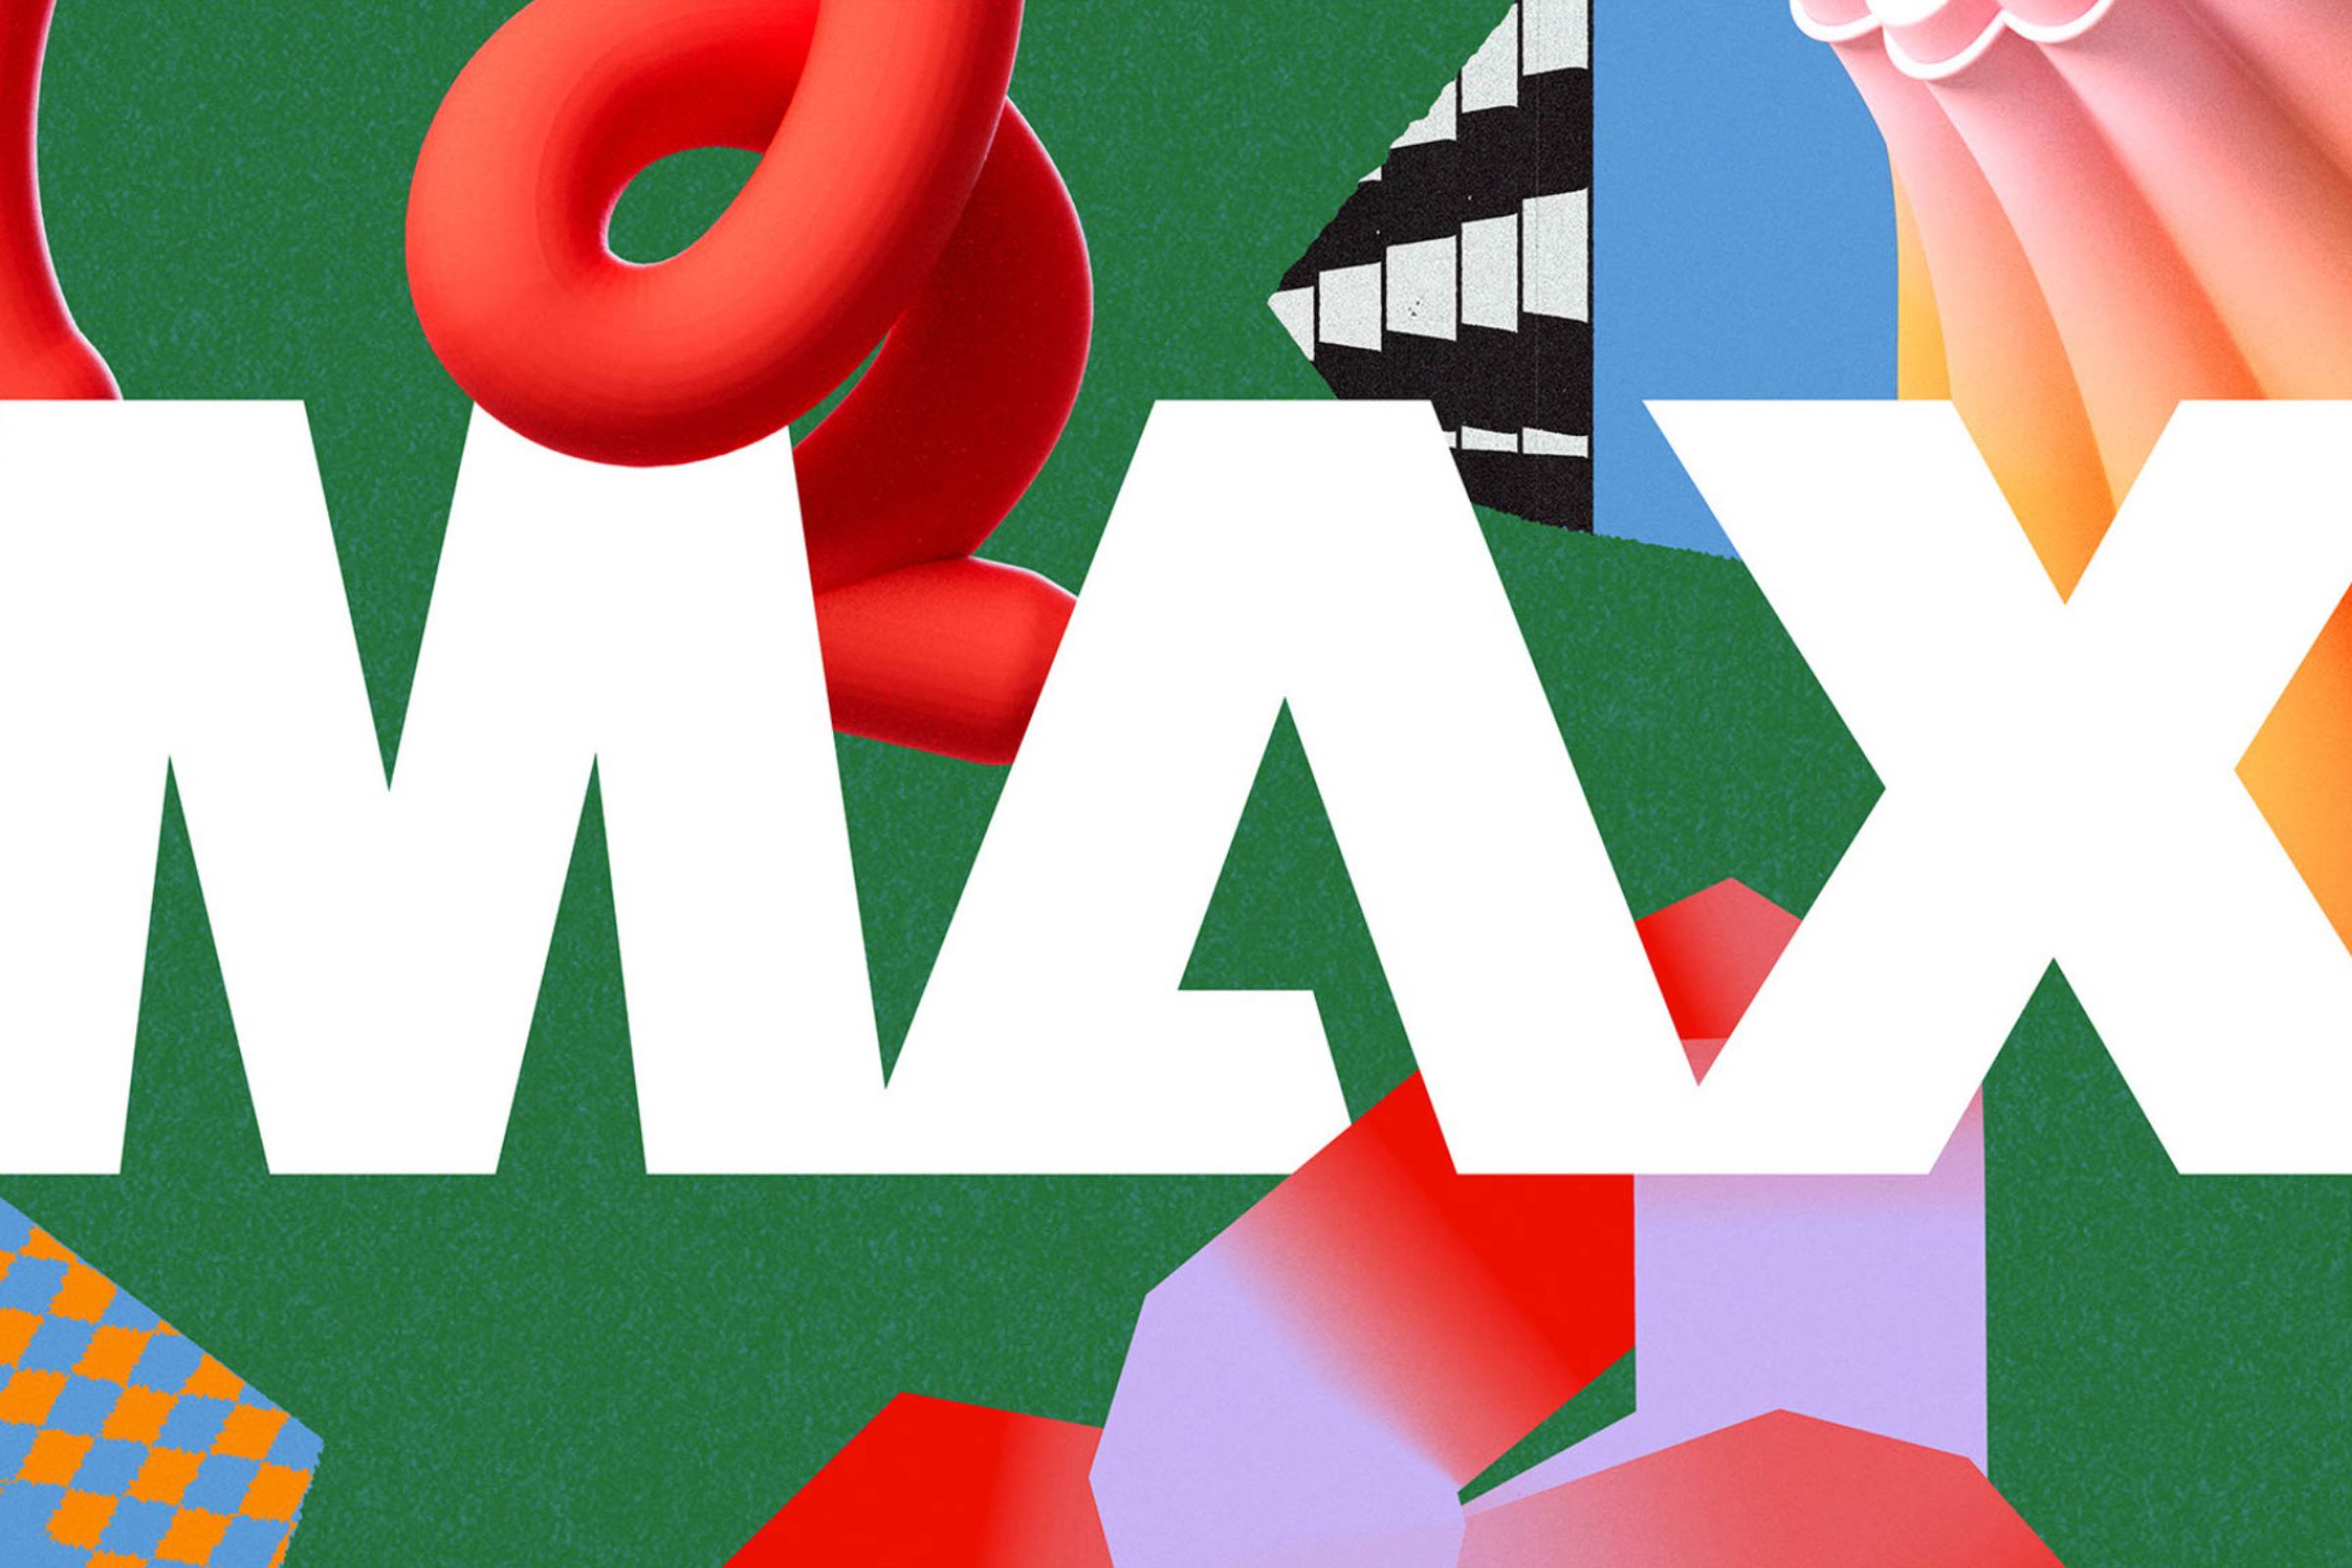 Adobe Max logo surrounded by various graphics and shapes.